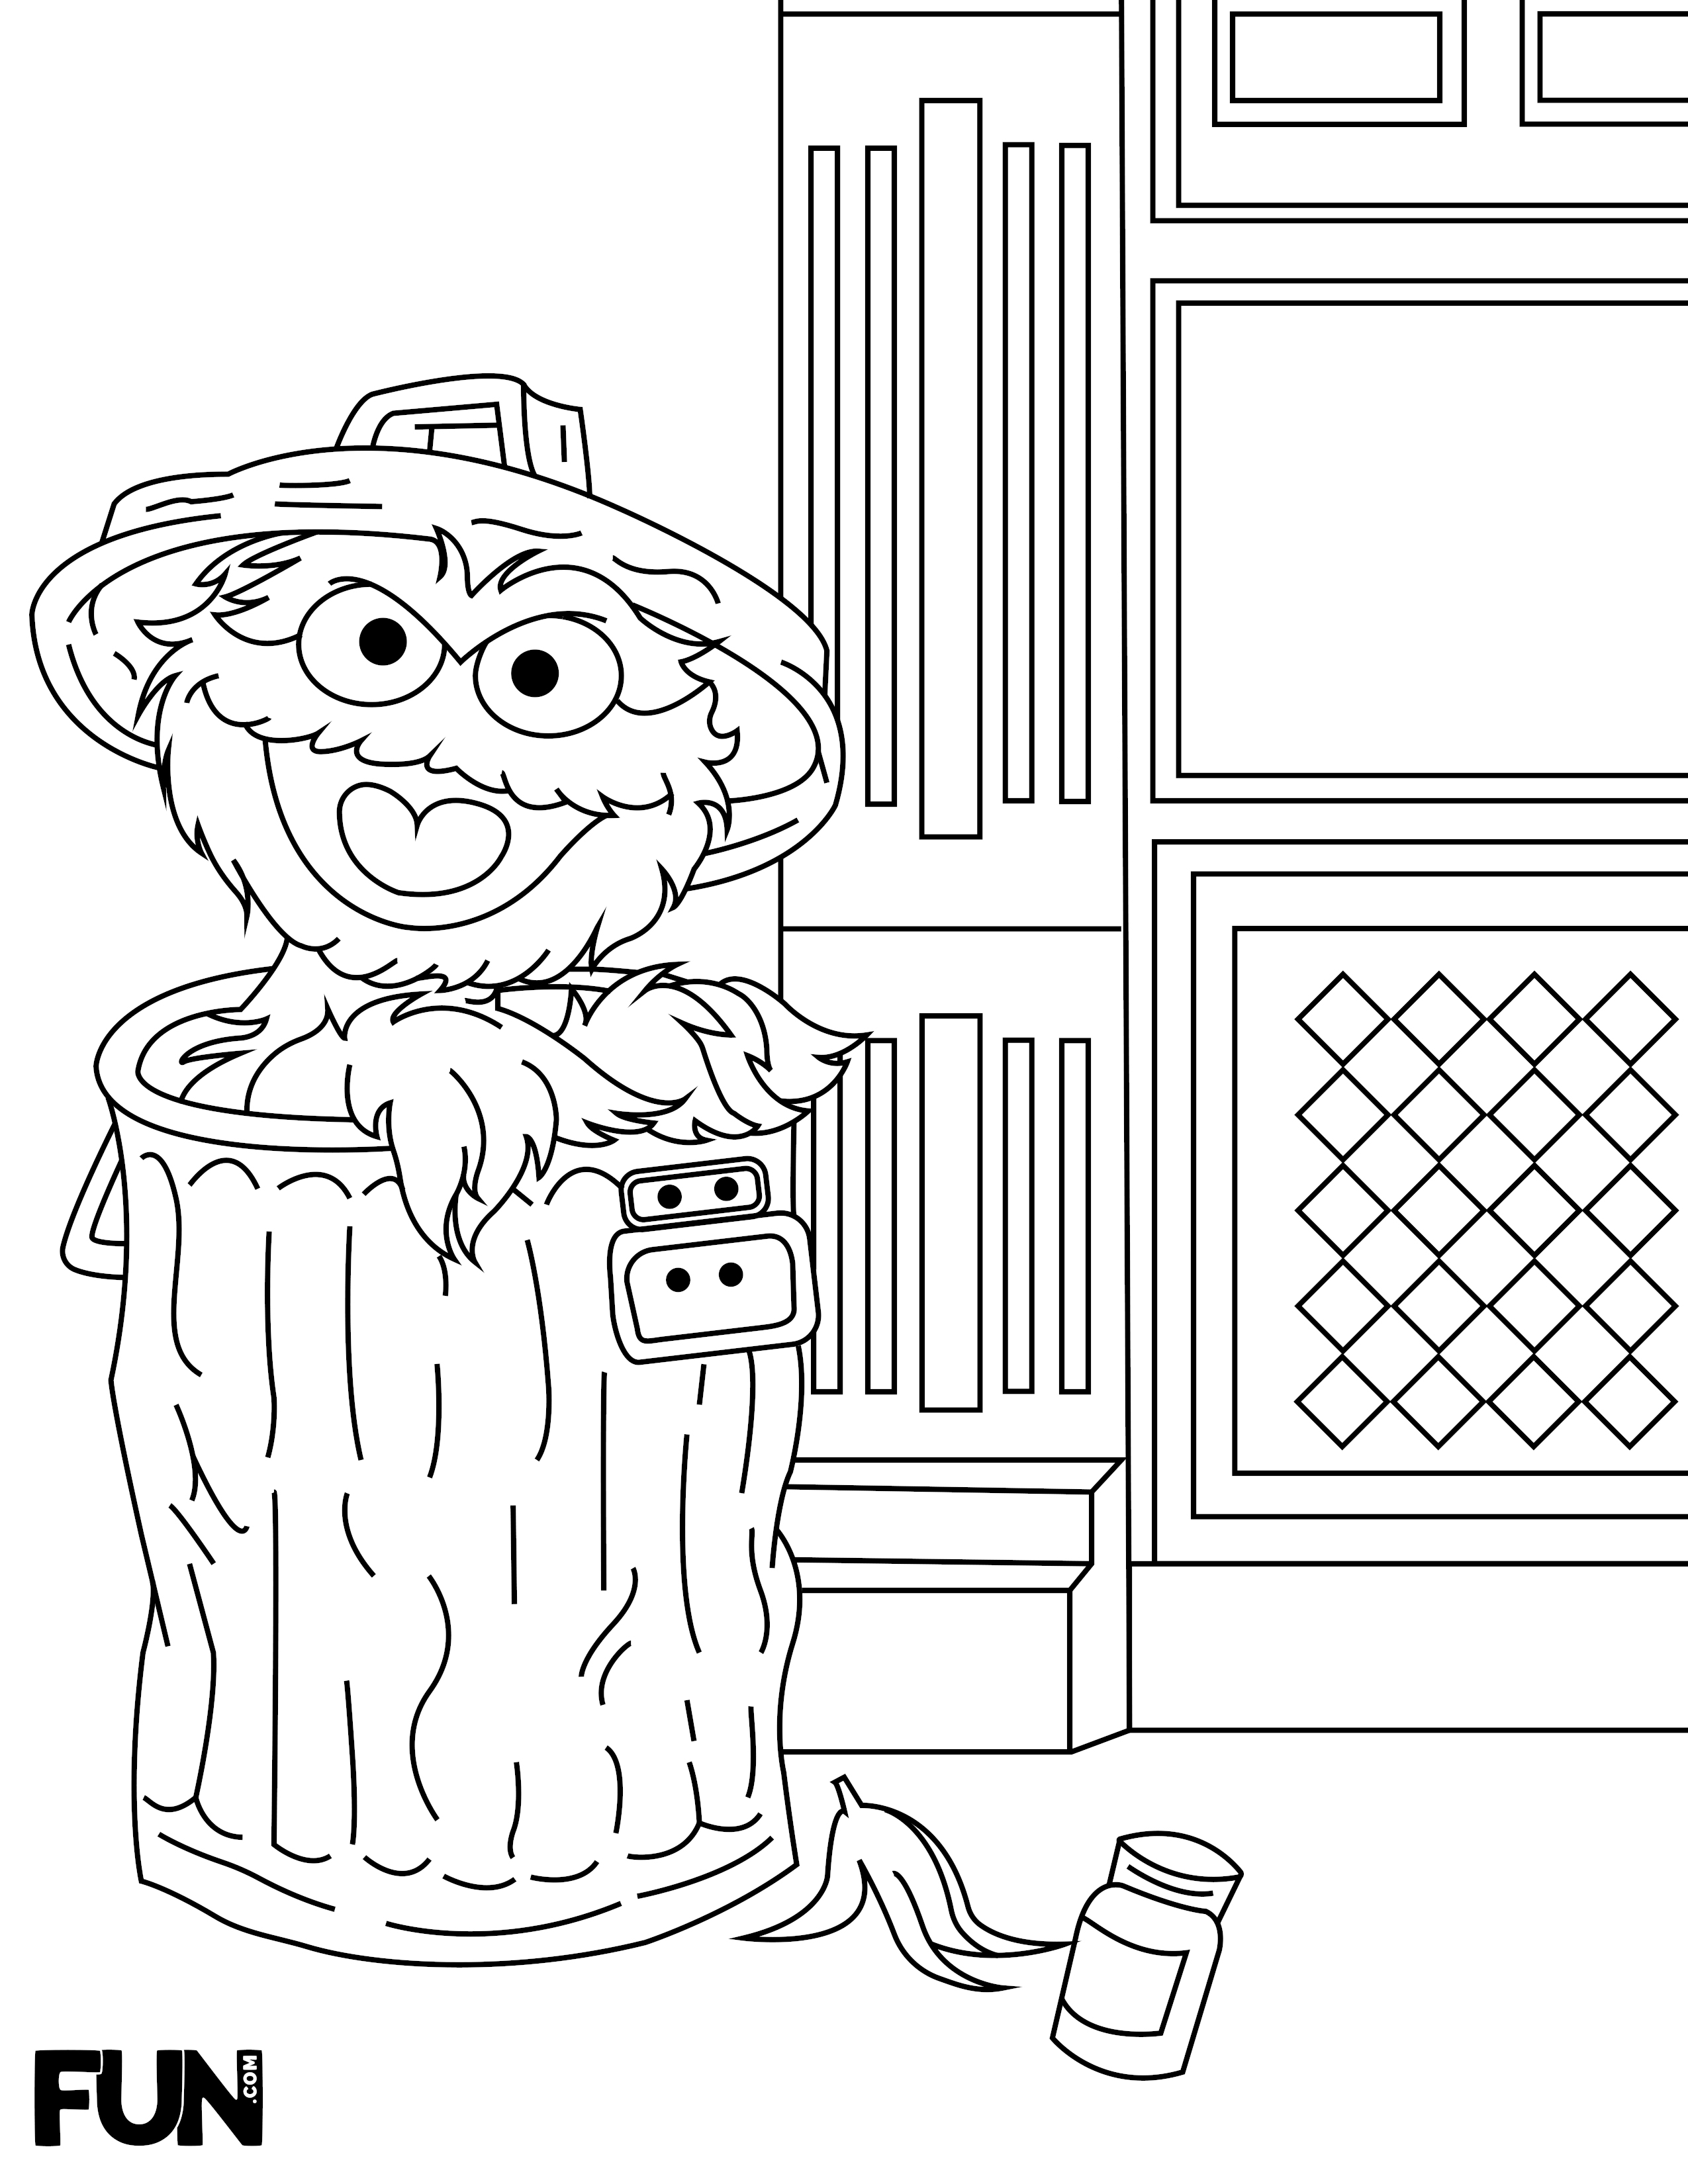 Oscar the Grouch Coloring Page